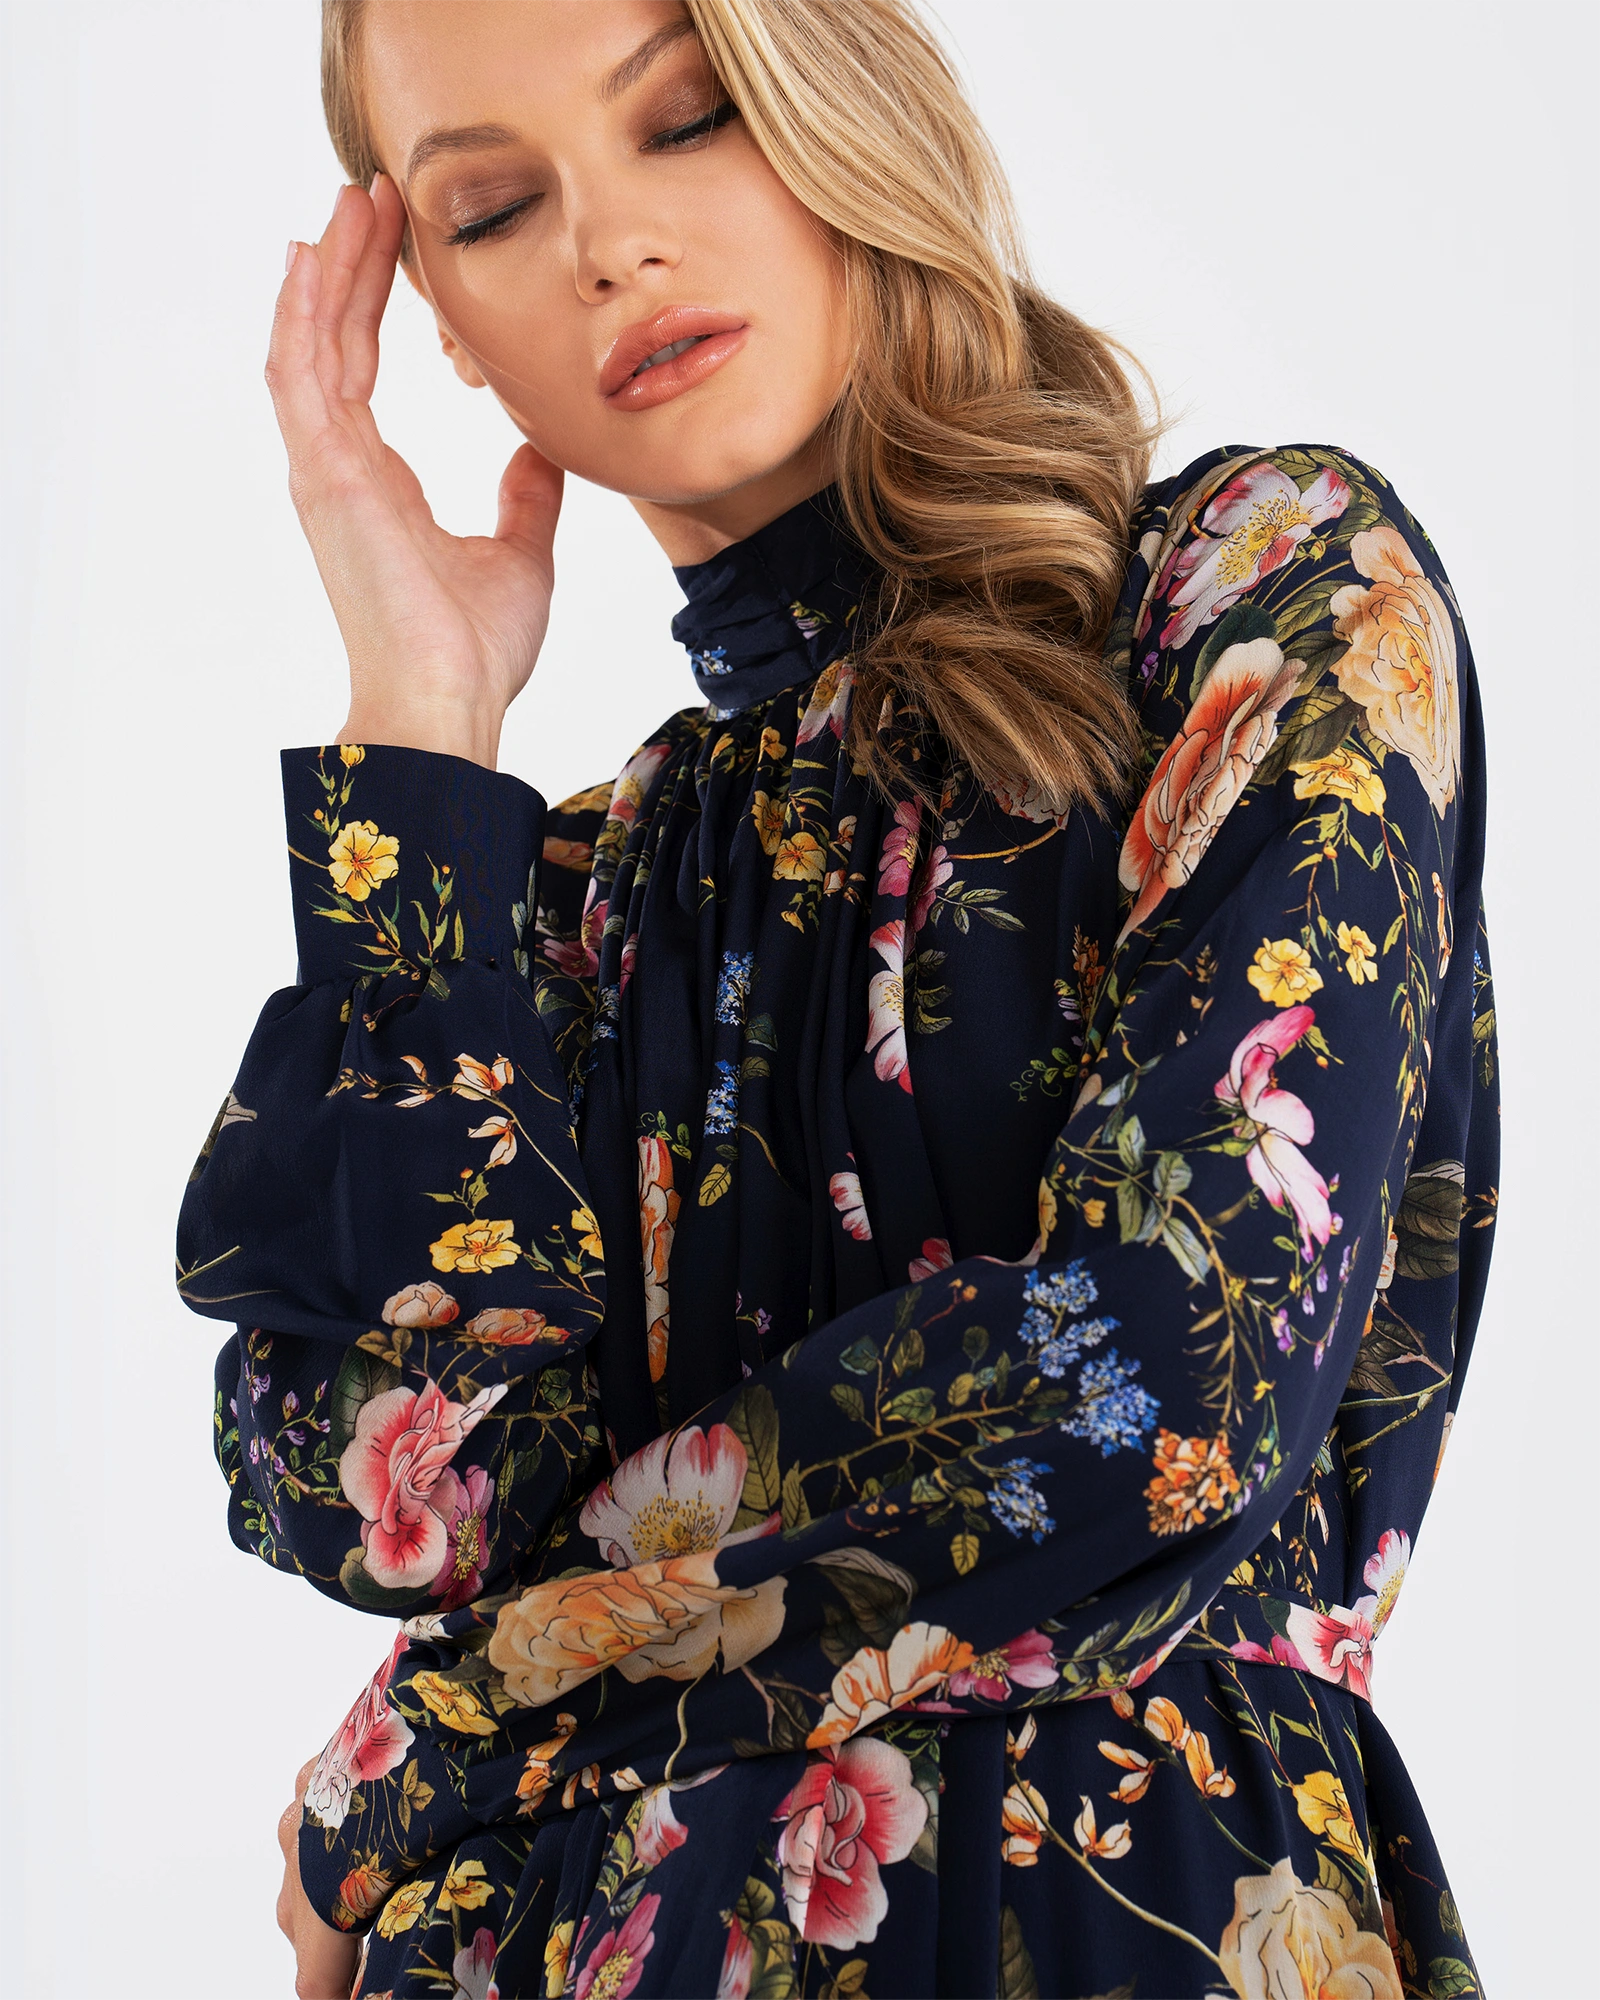 Long Sleeve Floral Bow Tie Dress